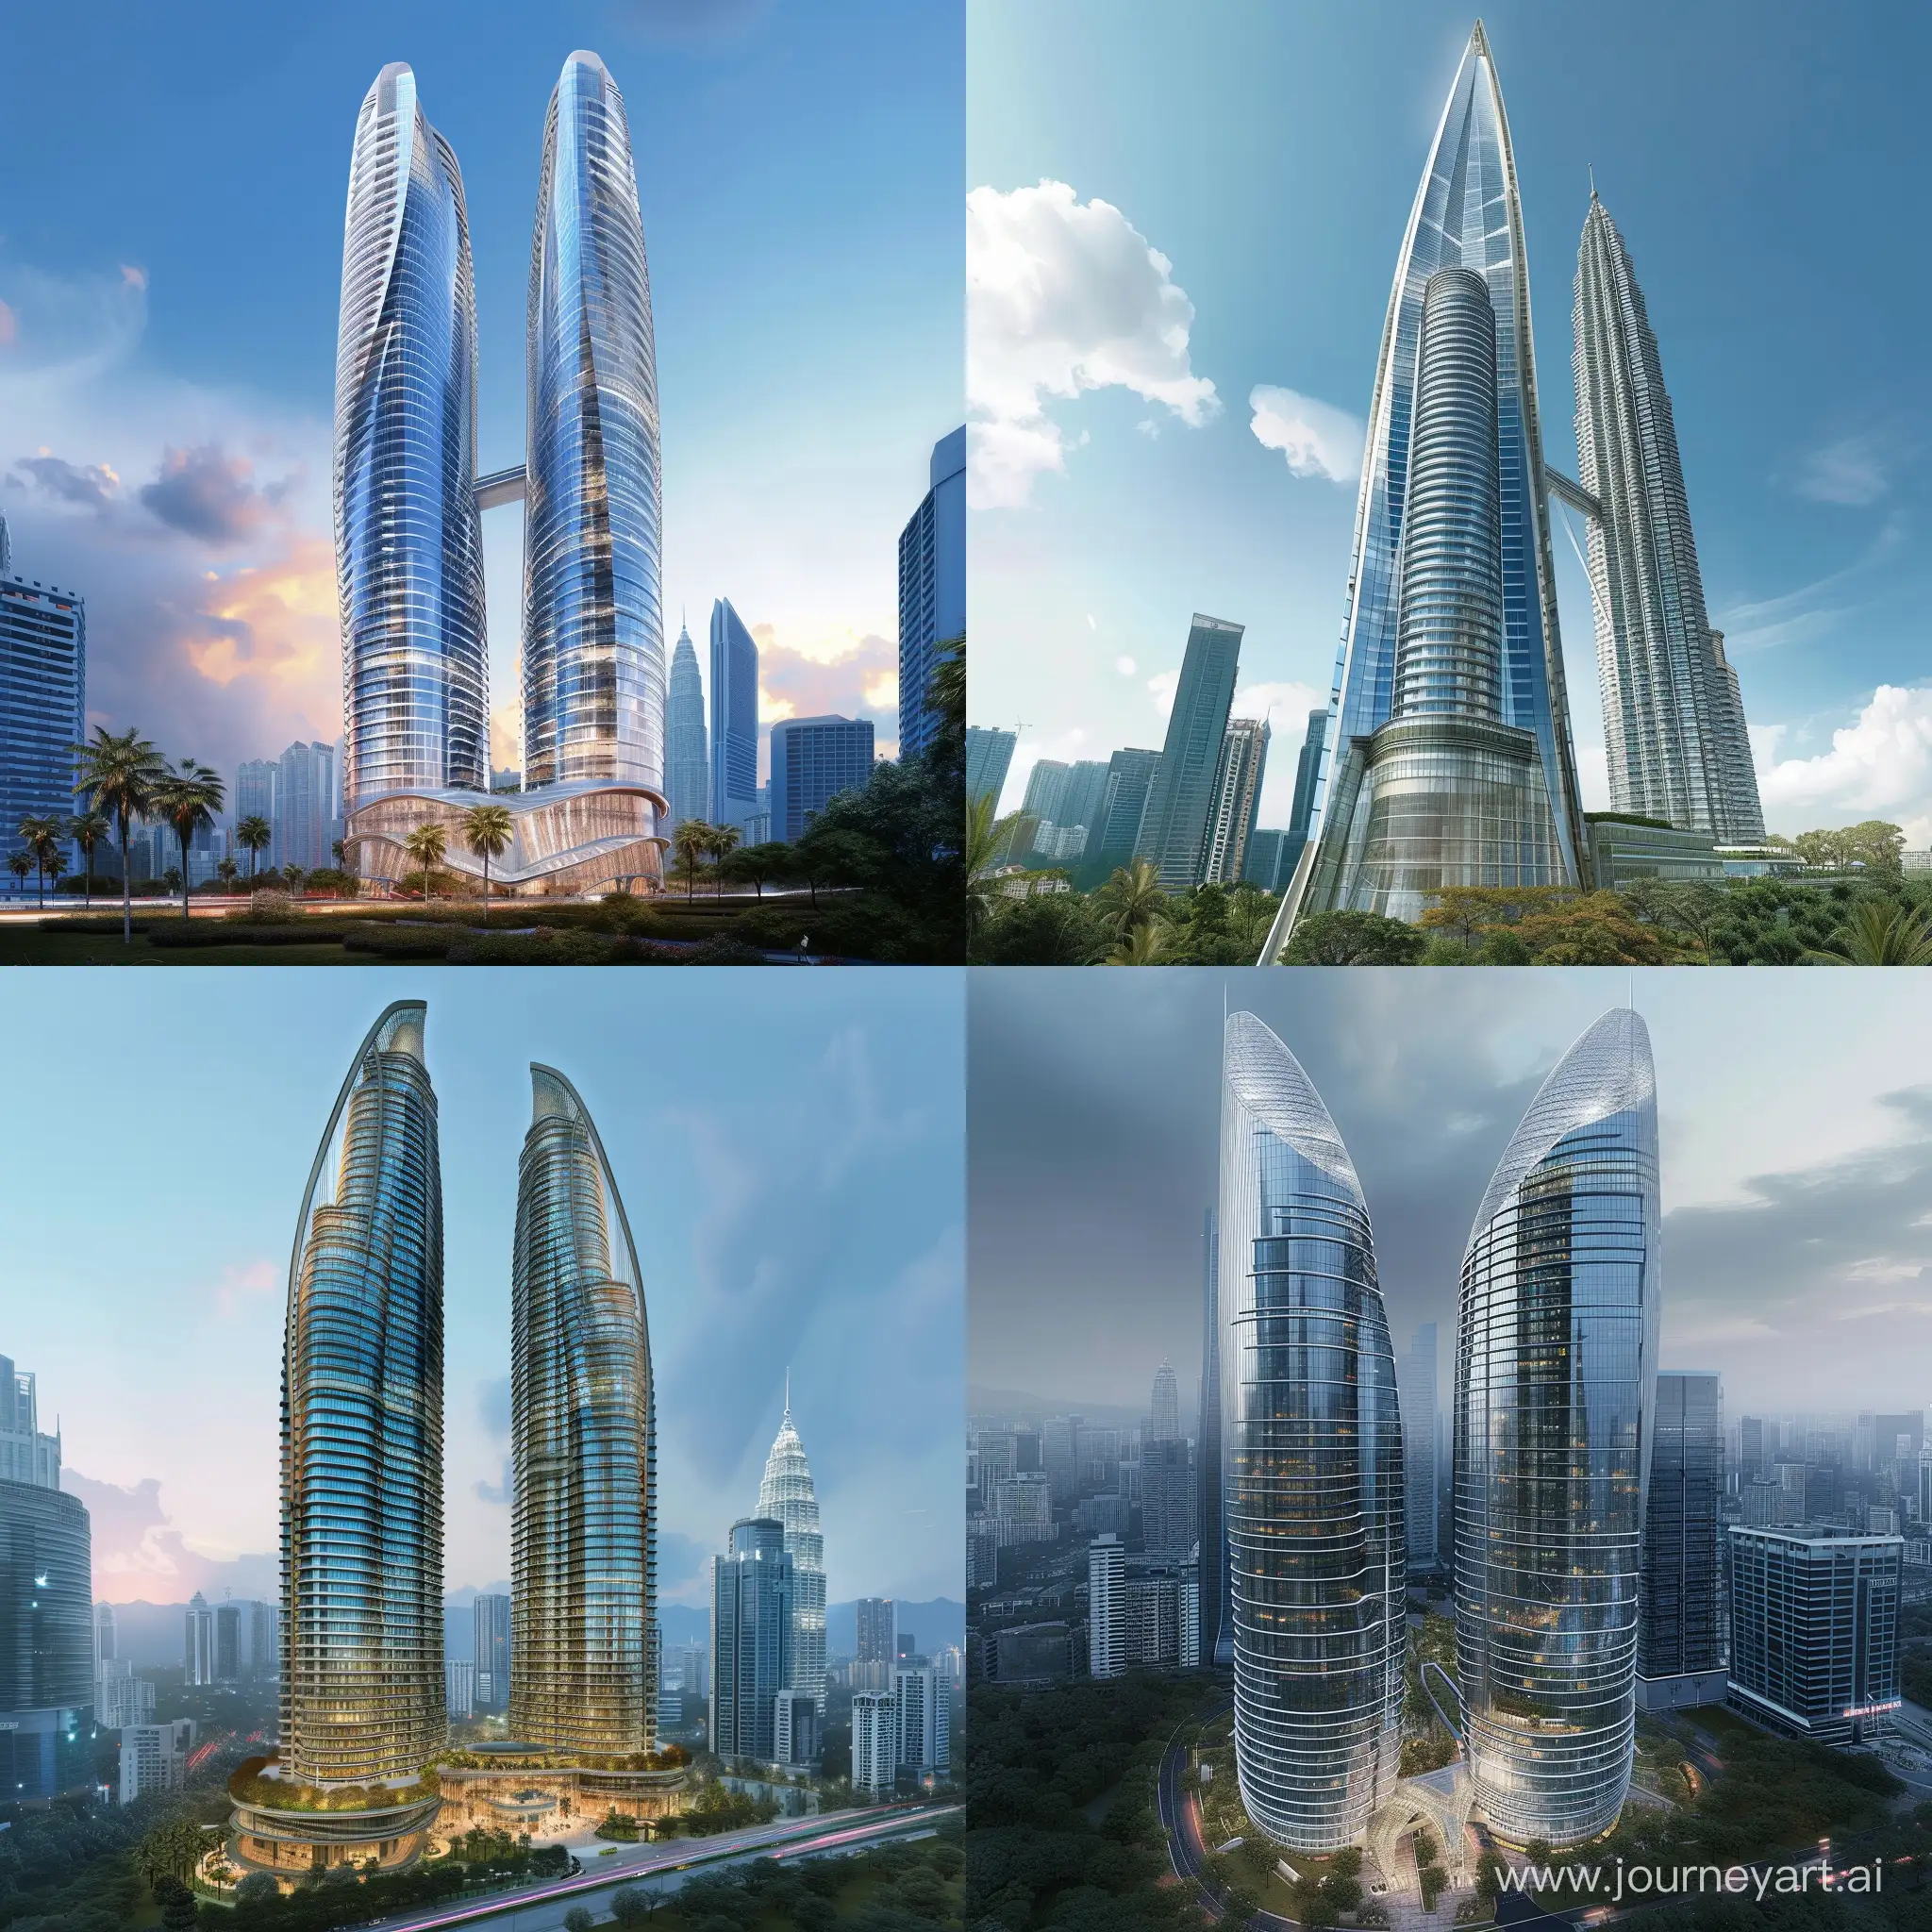 A 200-storey skyscraper divided into two towers connected by a glass corridor and the facade is made of glass, like the Petronas Twin Towers in a different shape.